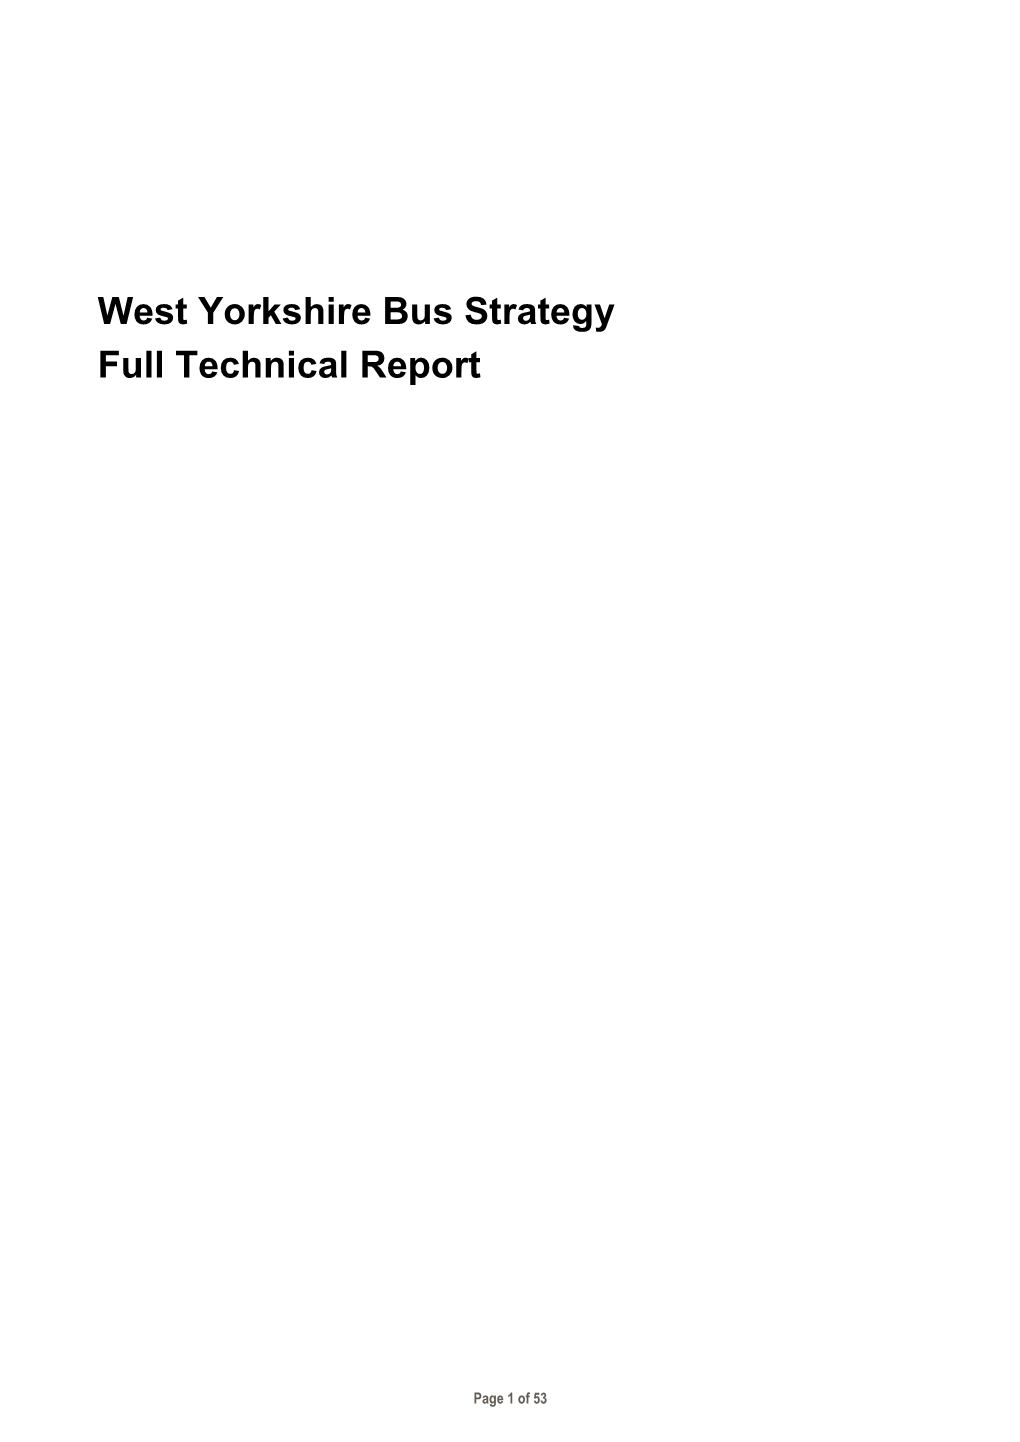 Bus Strategy Technical Report